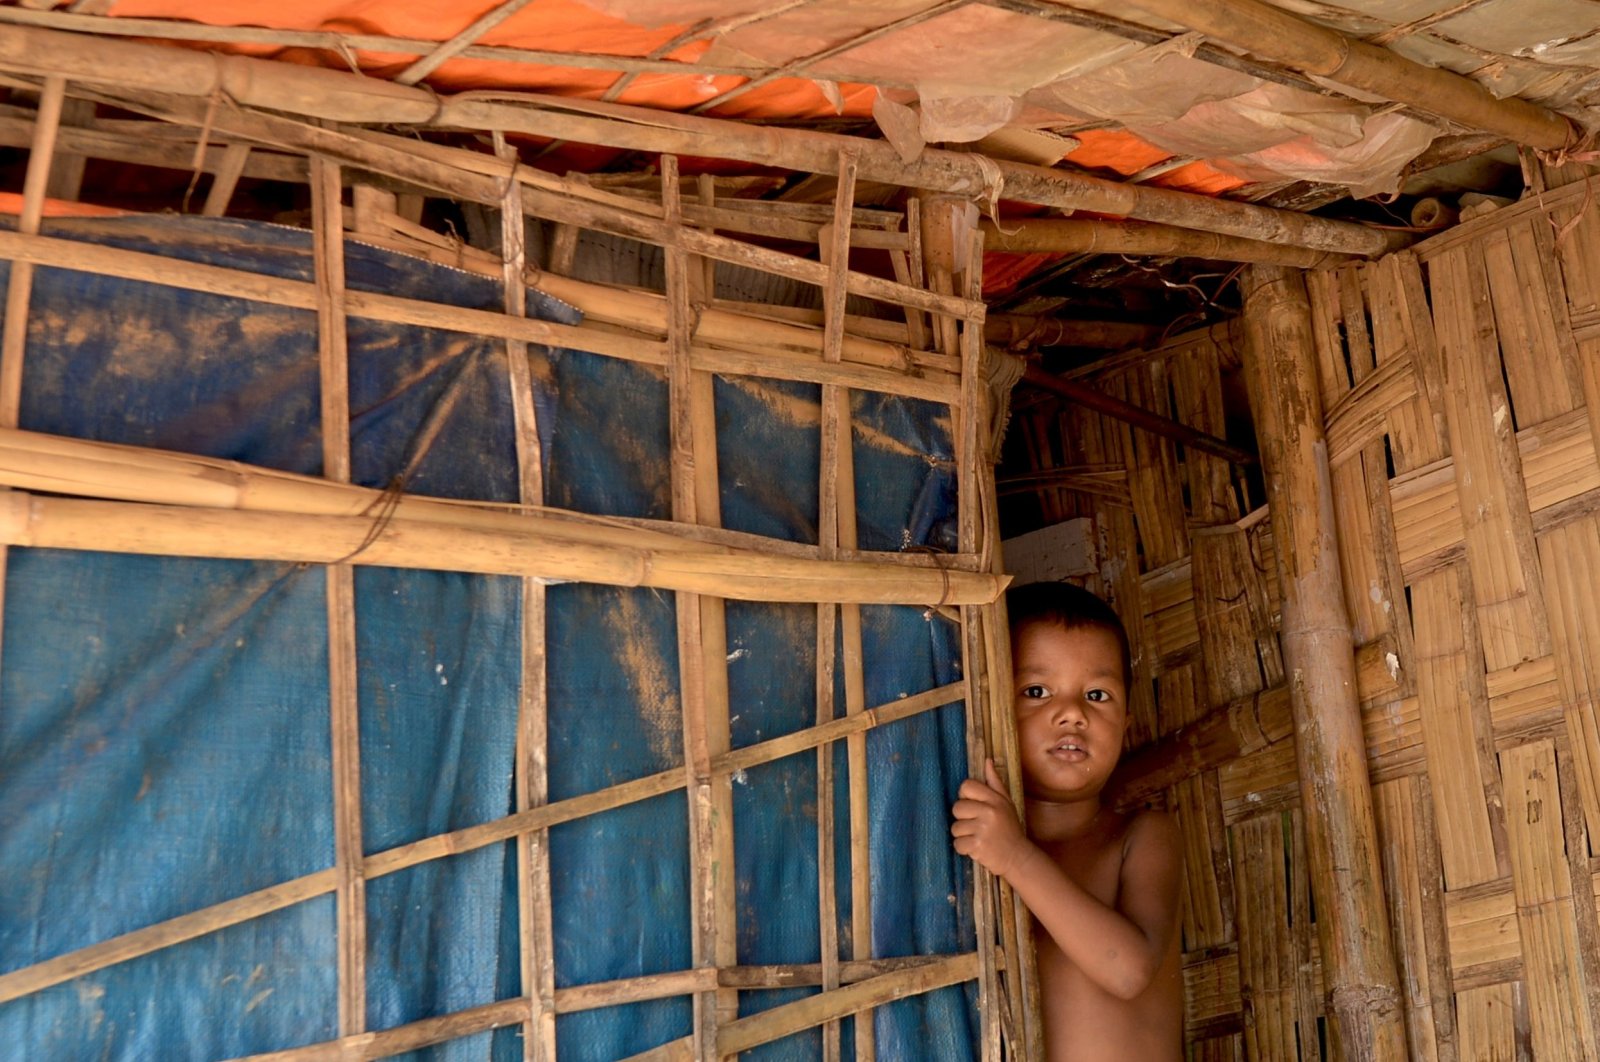 A Rohingya refugee child peeps out from his hut in Kutupalong refugee camp in Ukhia on Oc. 11, 2020. (AFP Photo)